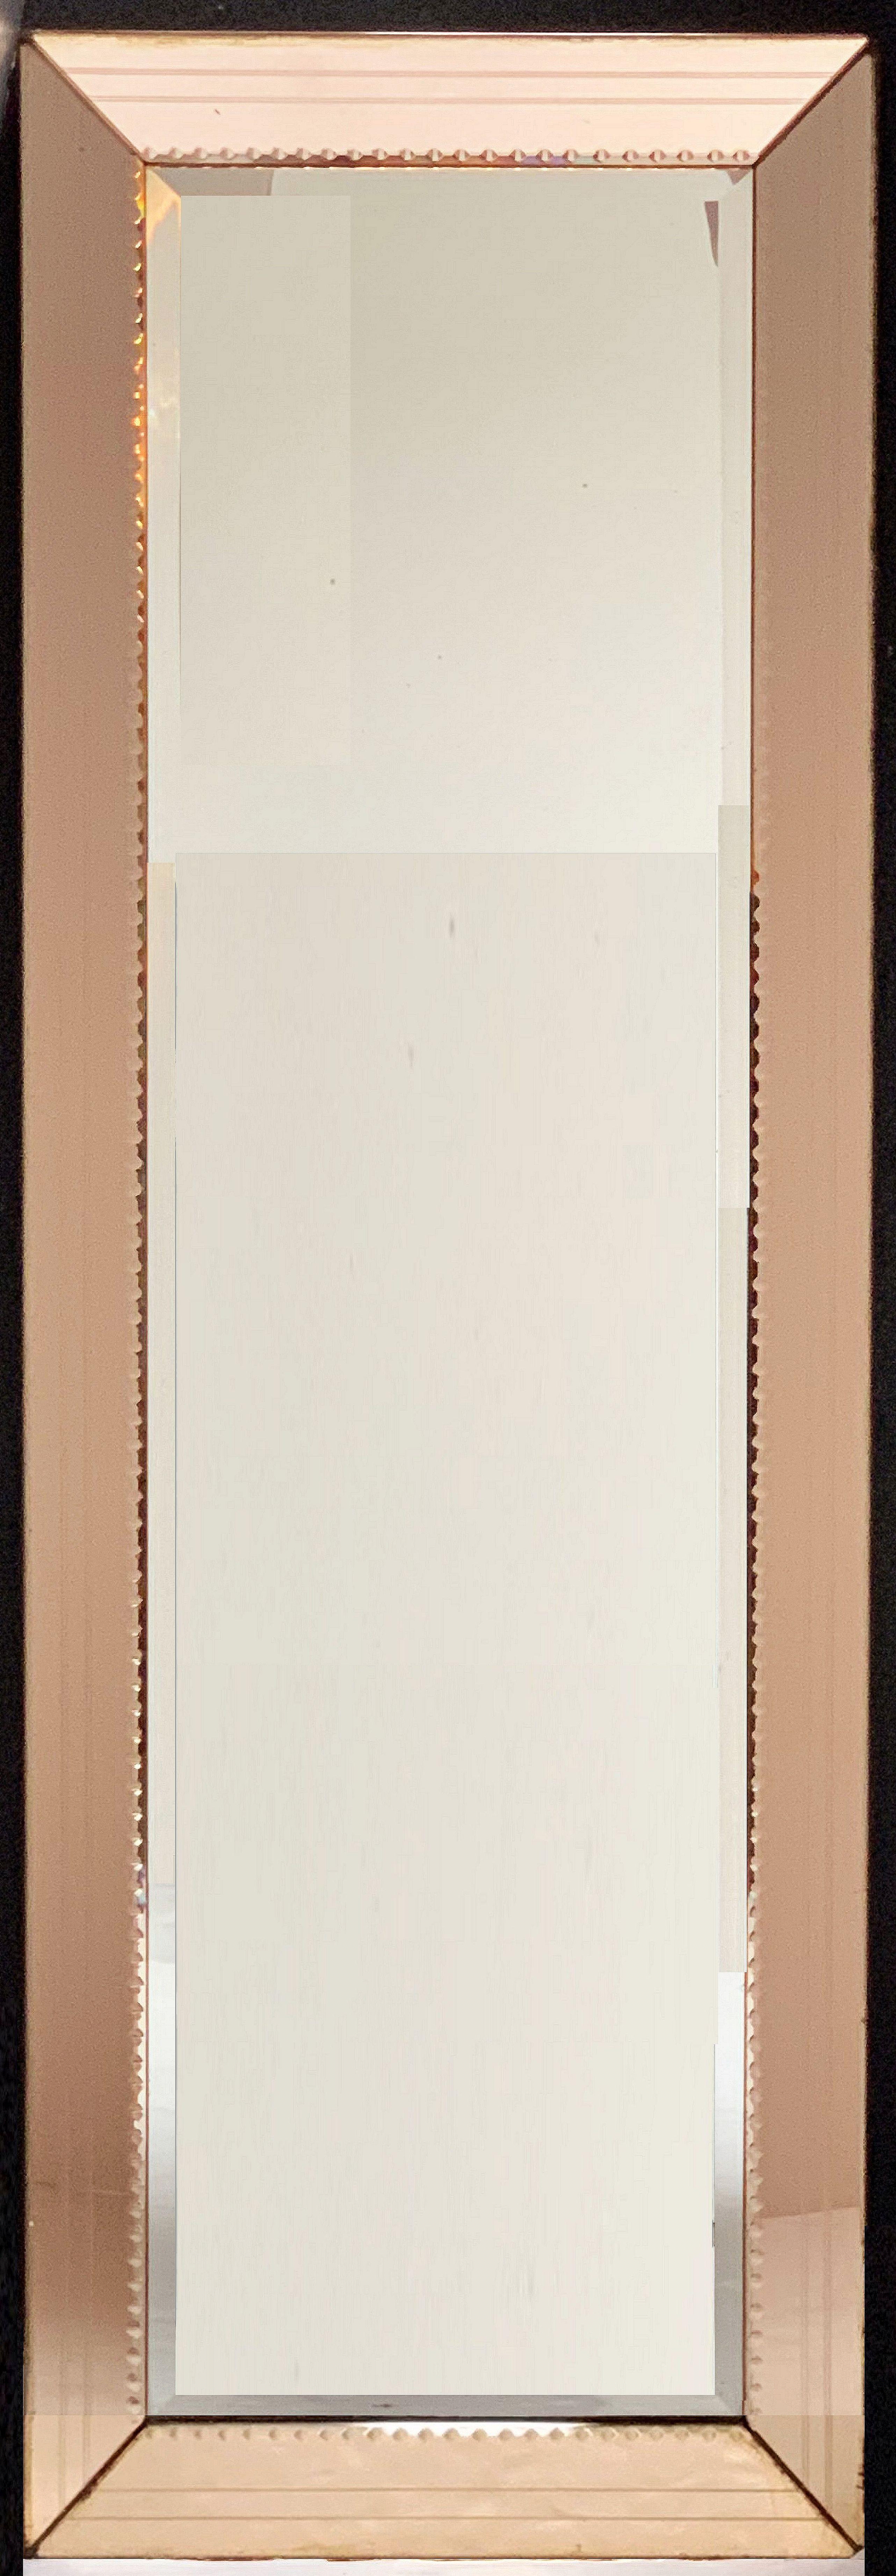 Art Deco Mirror with Beveled Frame of Copper-Colored Glass (H 58 3/4 x W 19 3/4) 13